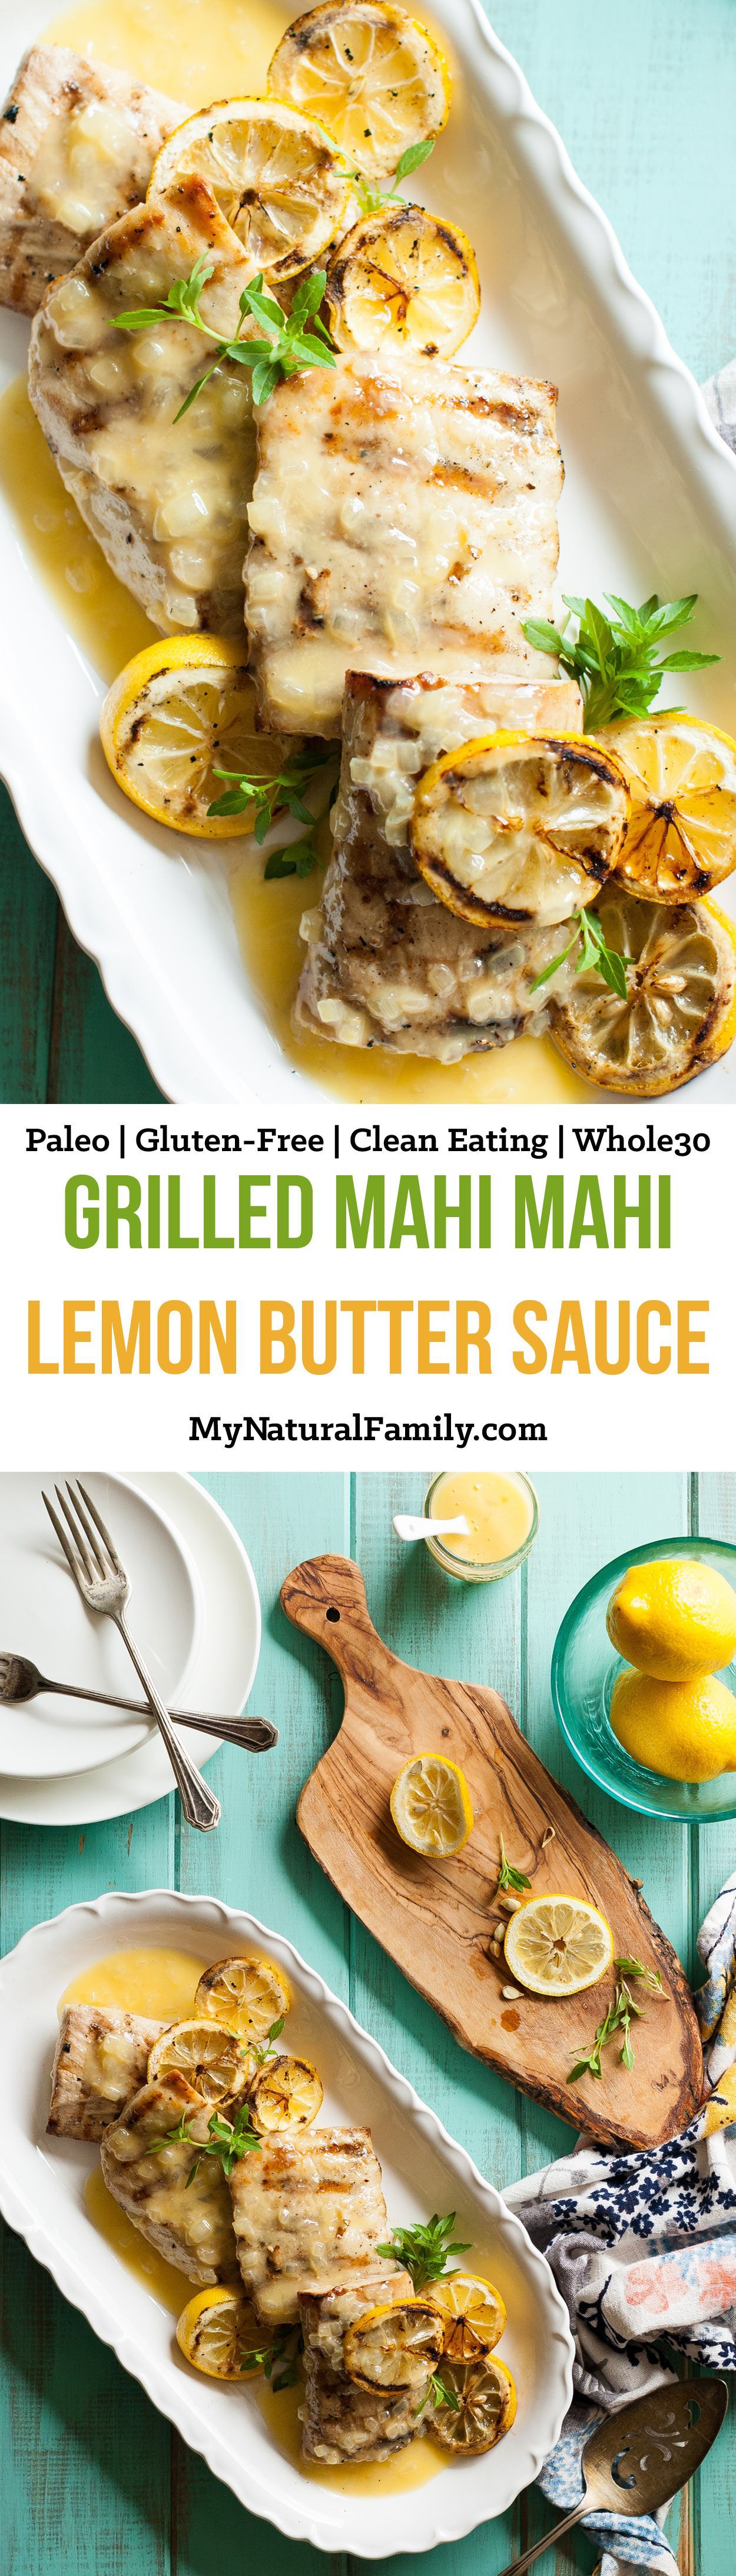 Grilled Mahi Mahi Recipe in a Lemon Butter Sauce (Carrabba’s Copycat) {Paleo, Clean Eating, Gluten-Free, Whole30} – simple enough